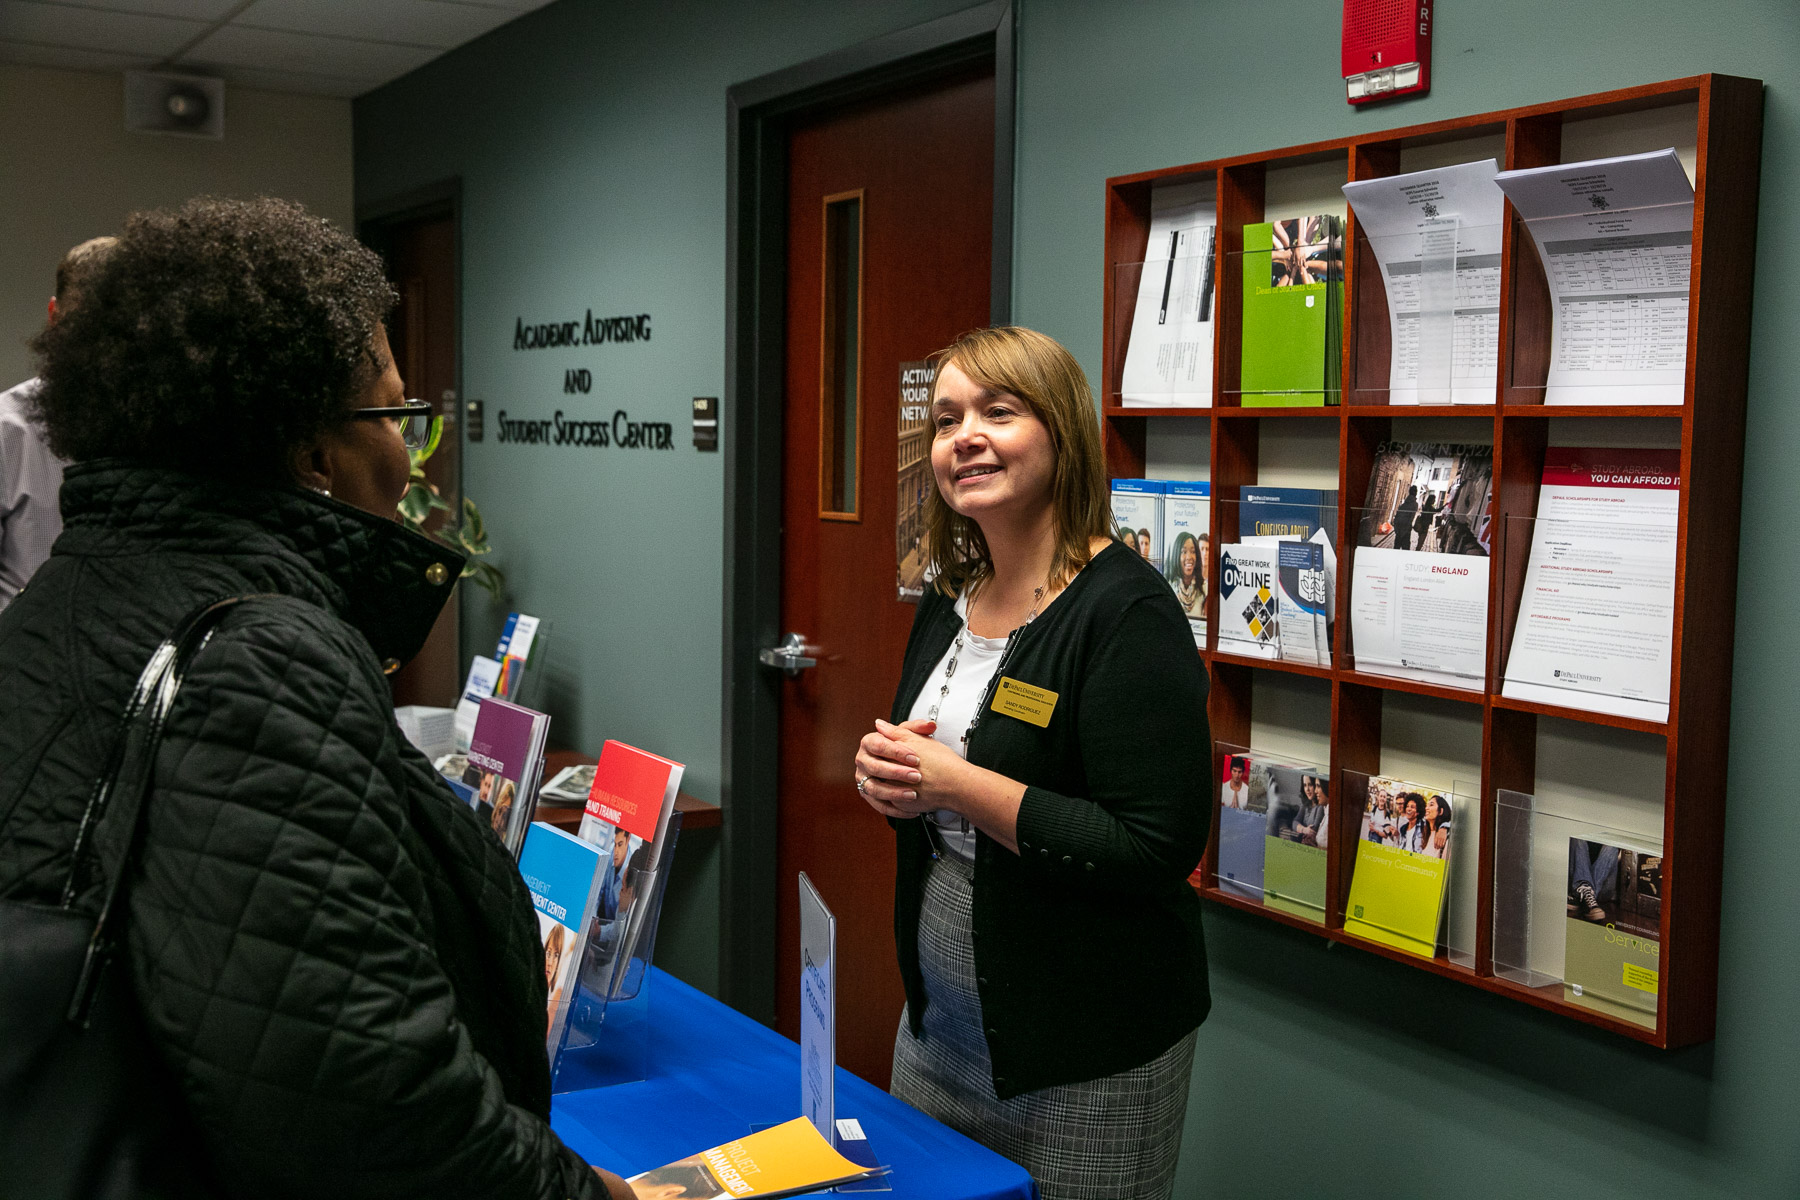 Sandy Rodriguez, marketing communications specialist, shares information about resources available at the School of Continuing and Professional Studies. (DePaul University/Randall Spriggs)